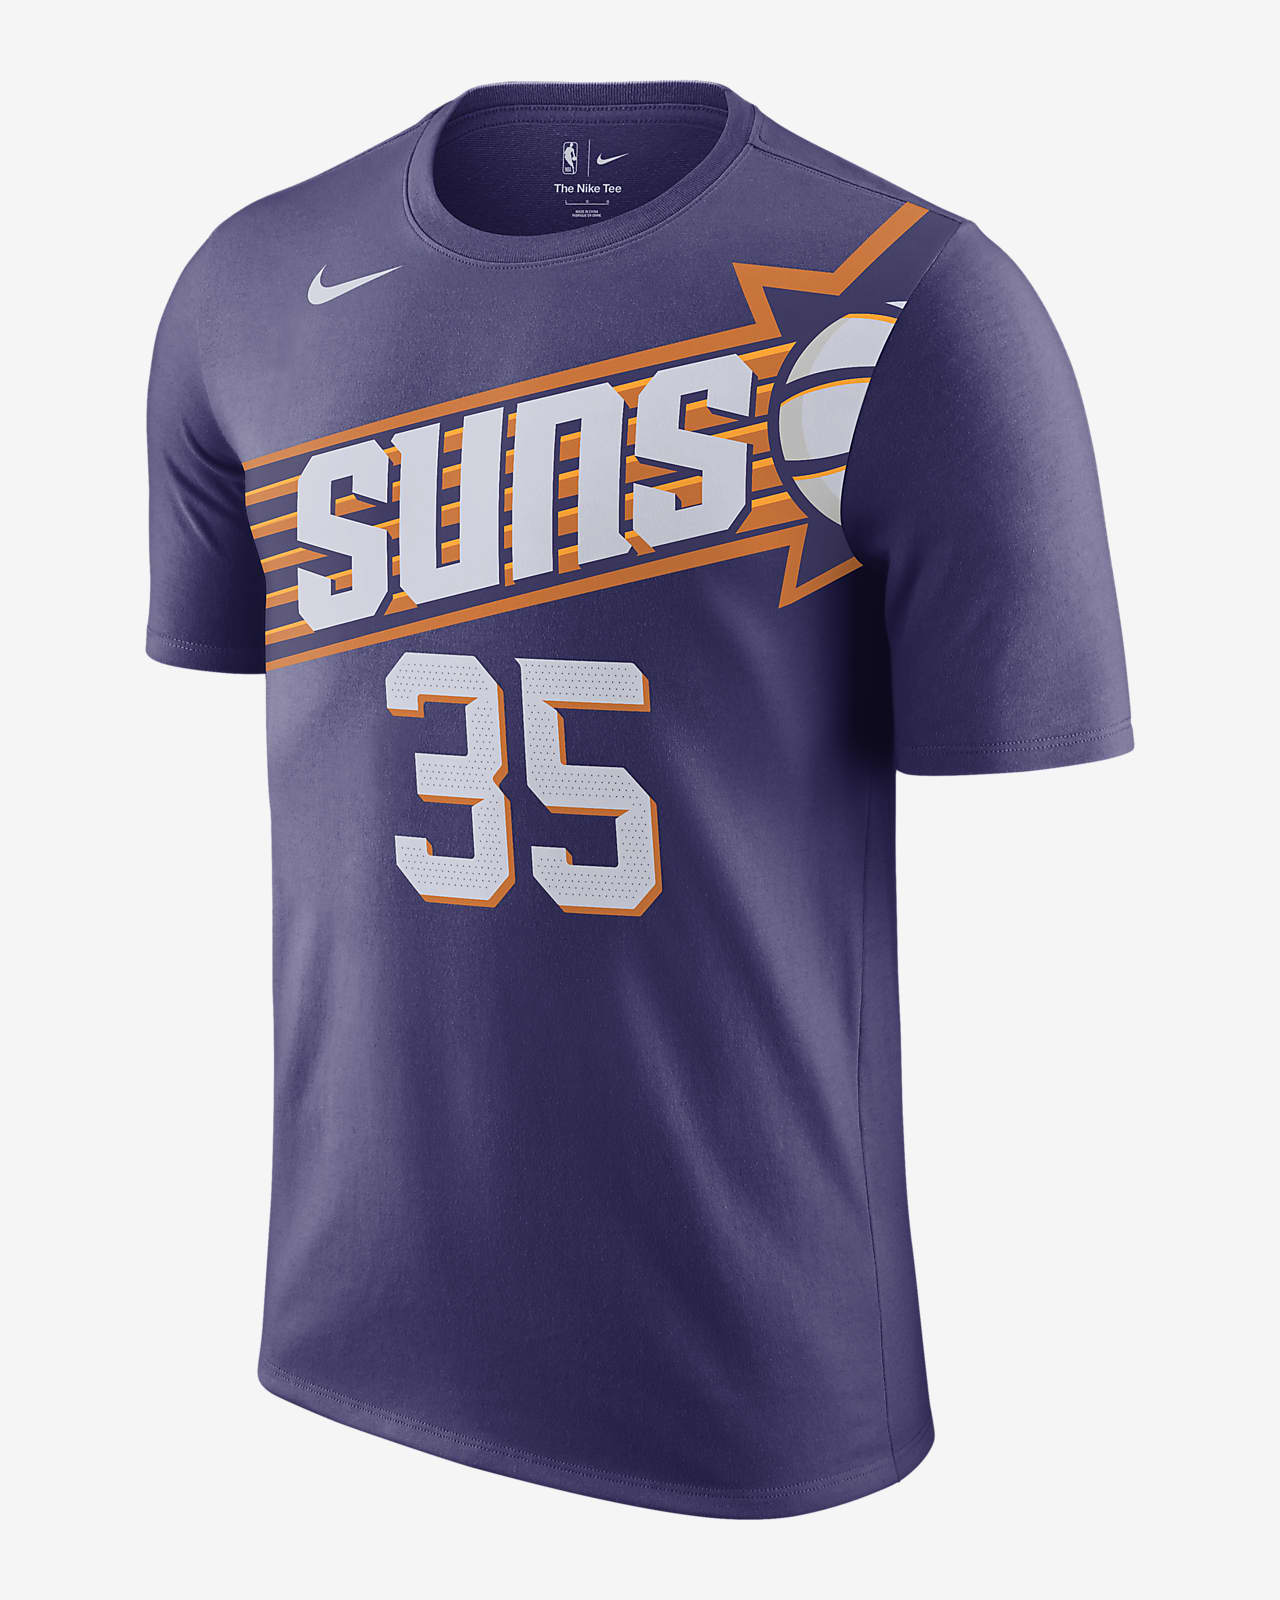 Kevin Durant Jerseys, Durant Suns Jersey, NBA Kevin Durant Gear